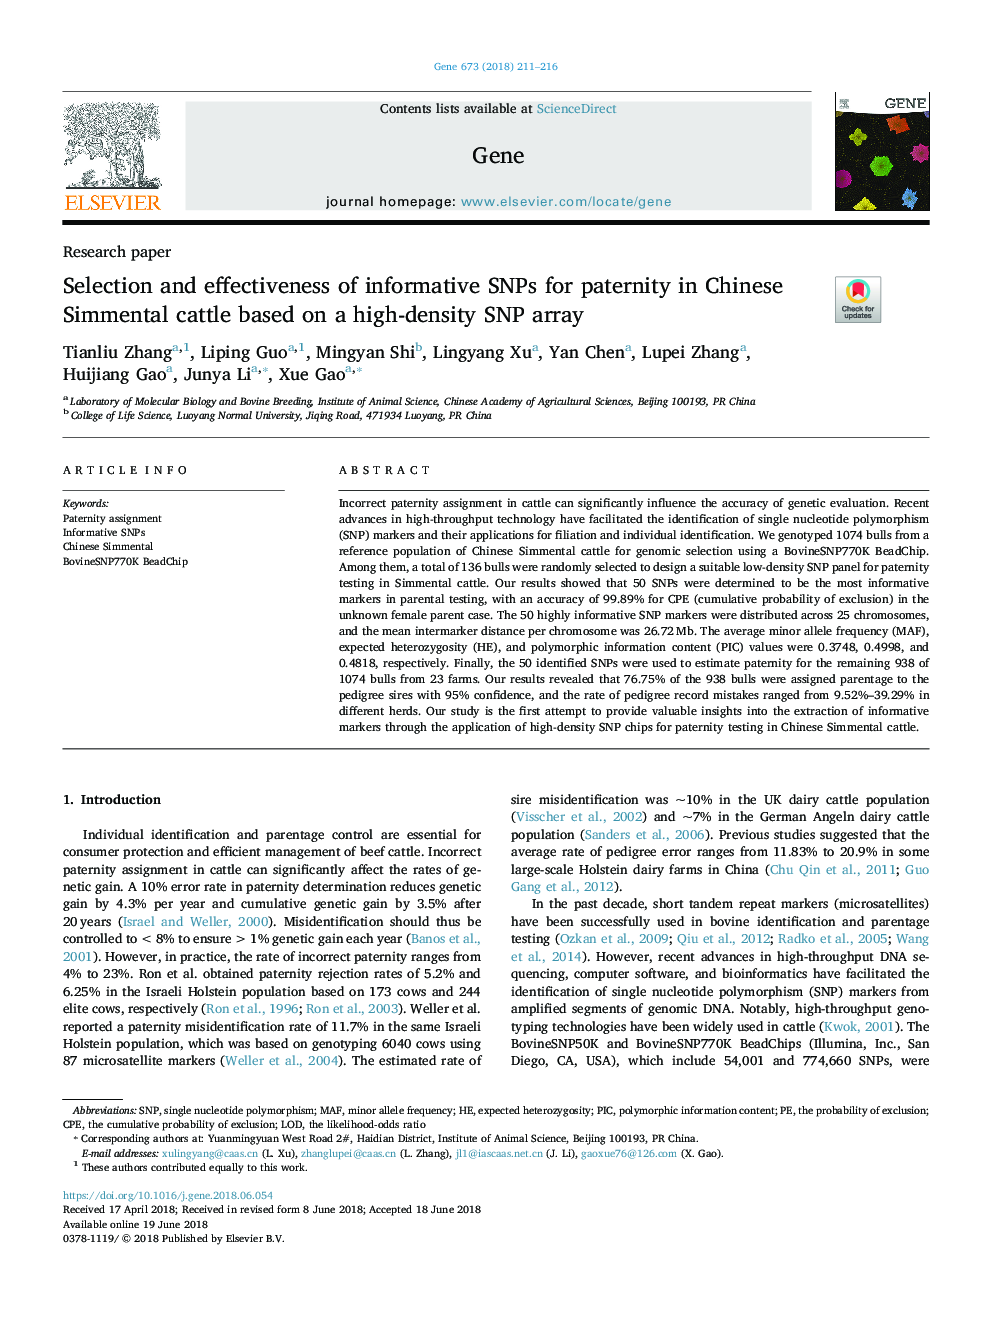 Selection and effectiveness of informative SNPs for paternity in Chinese Simmental cattle based on a high-density SNP array